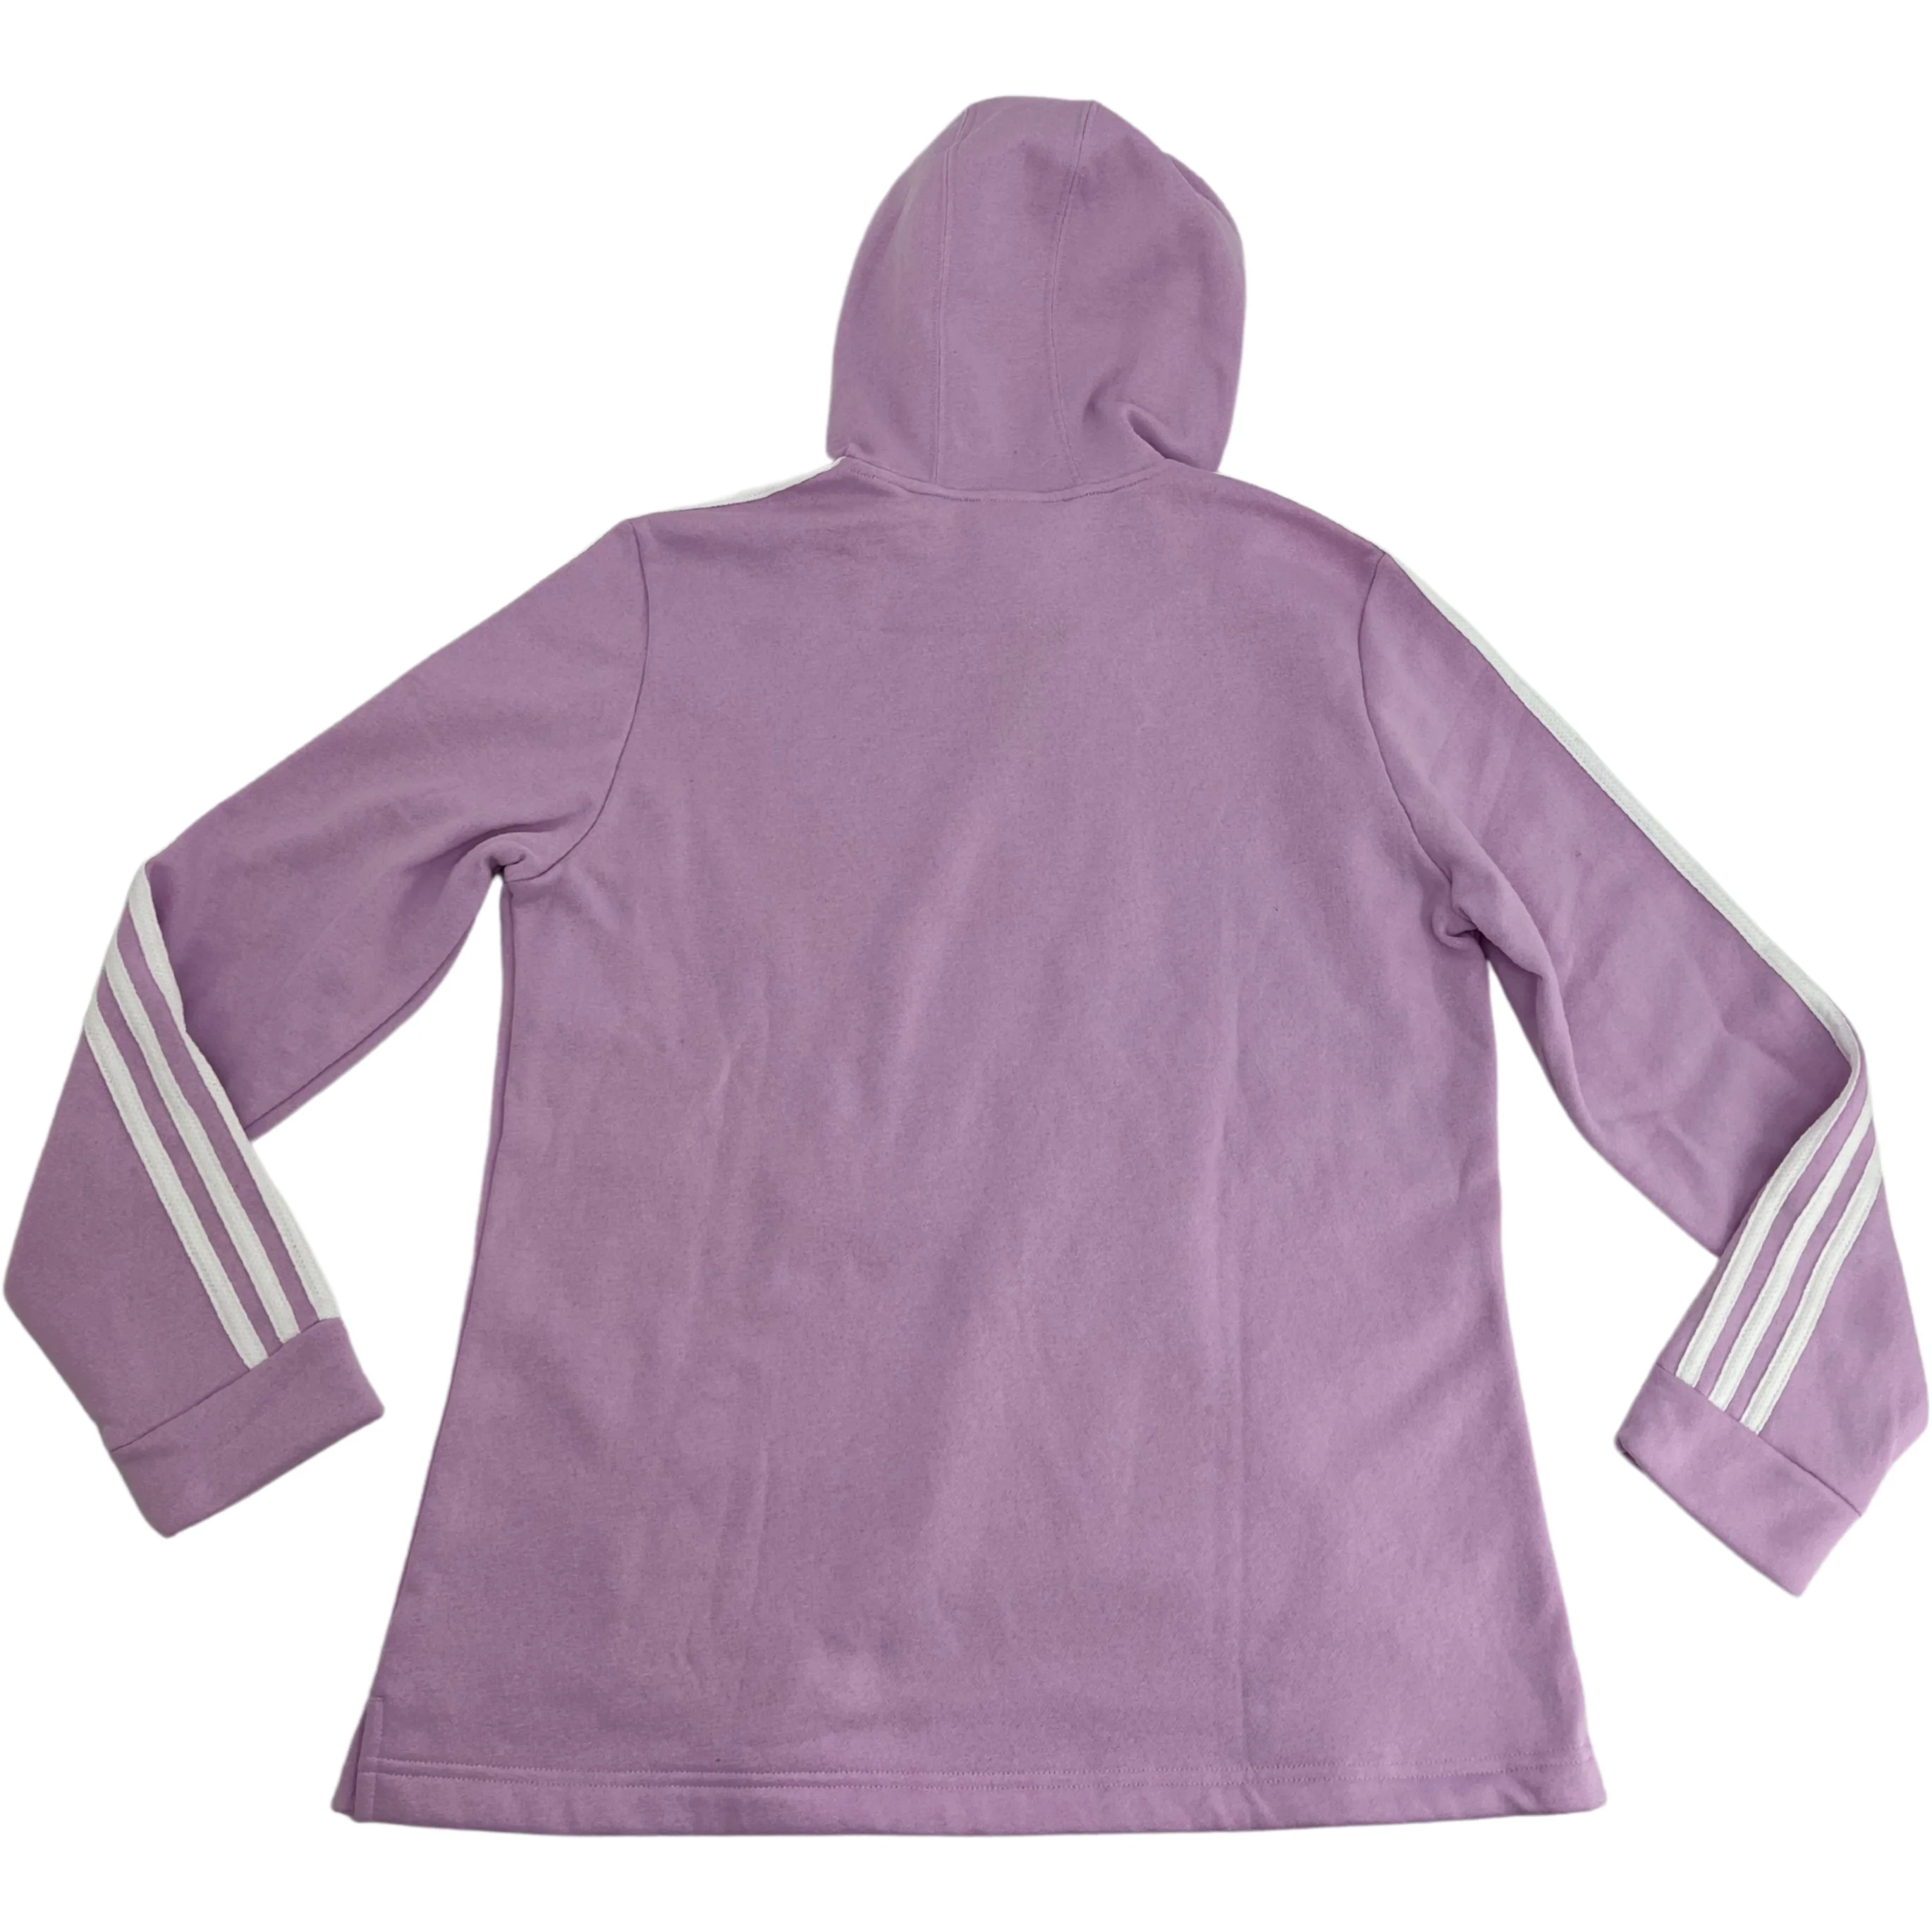 Adidas Women's Hooded Pullover Sweater / Purple / Size Large